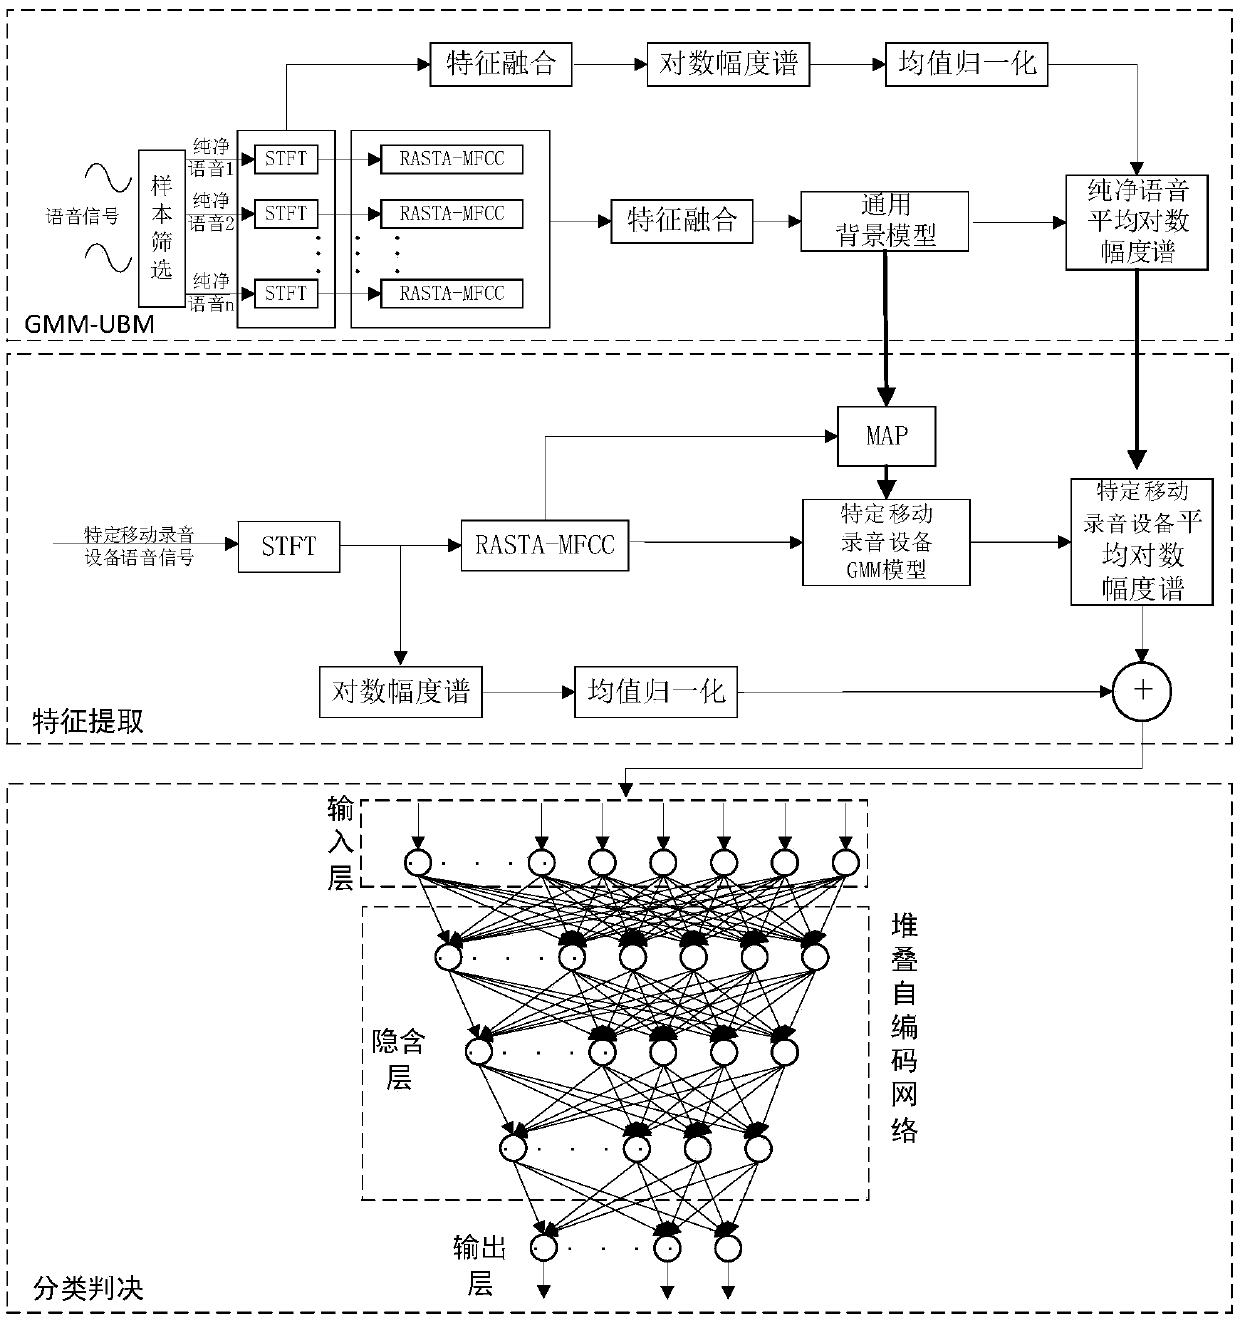 Mobile voice recording device source identification method based on stacked auto-encoding network